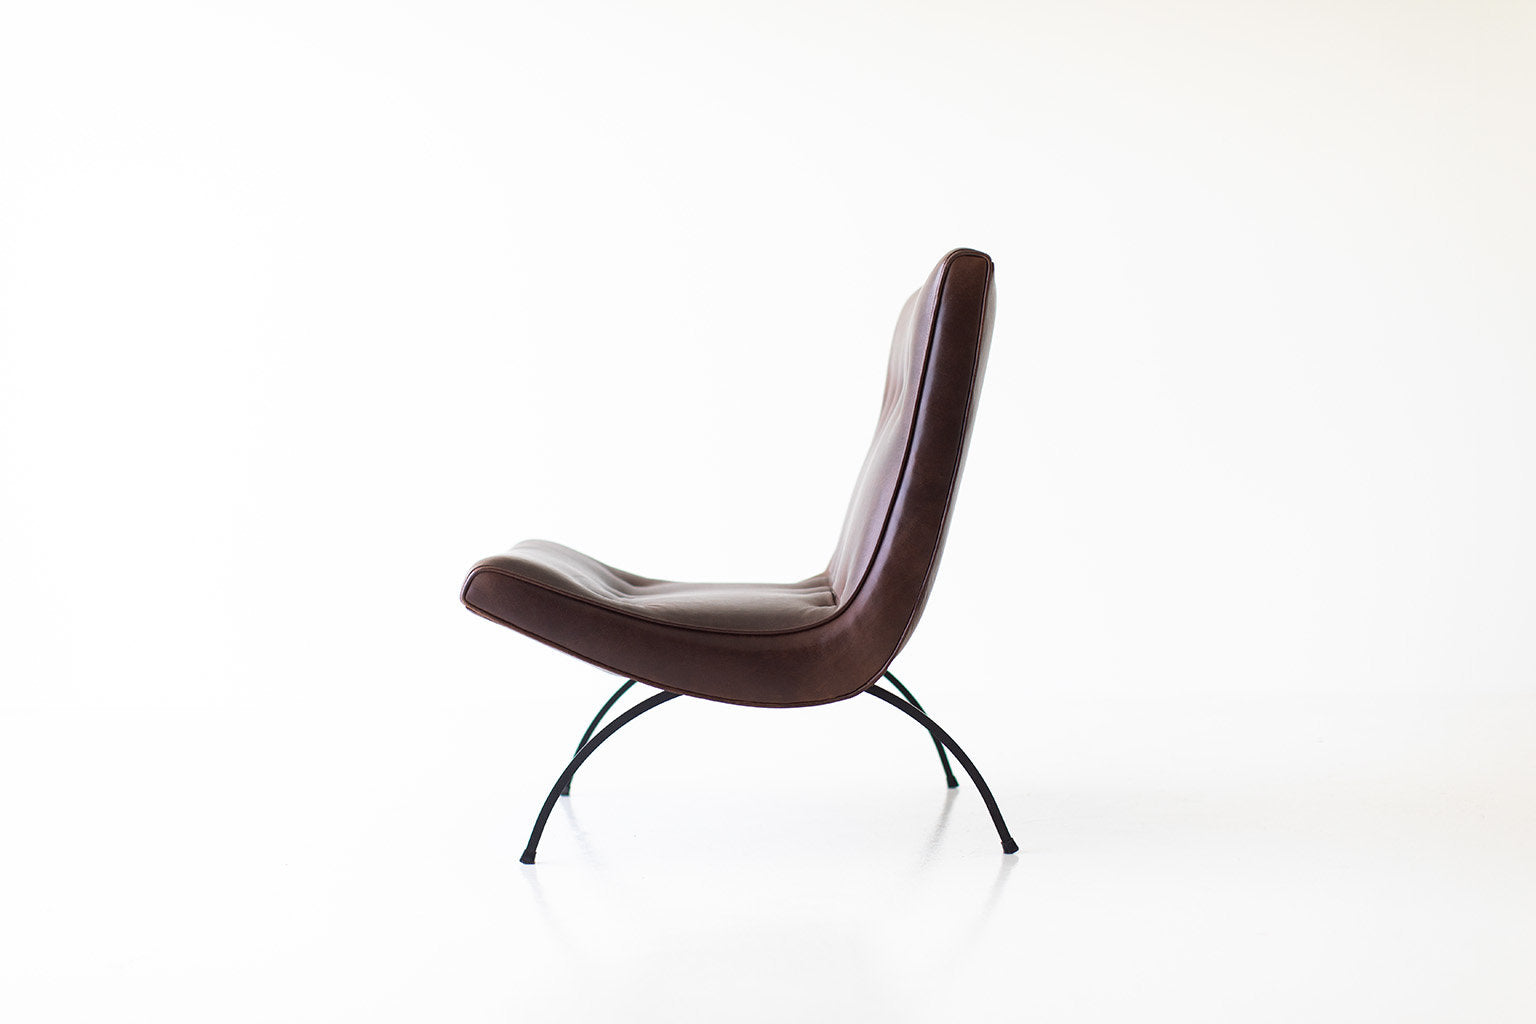 Milo Baughman Leather Scoop Lounge Chair for Thayer Coggin - 06041802